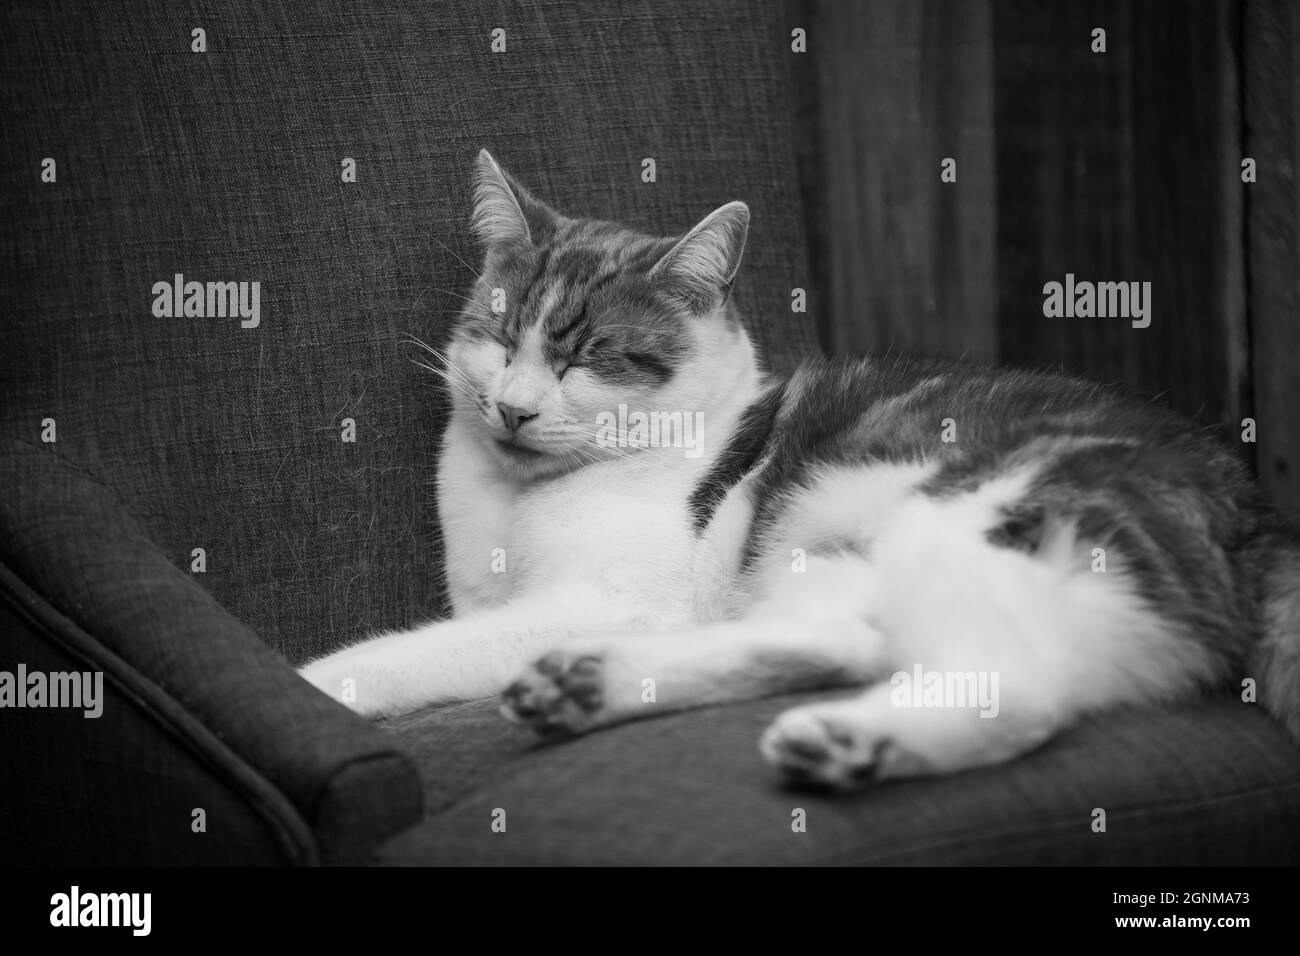 black and white photo of a cat sleeping in a chair outside Stock Photo